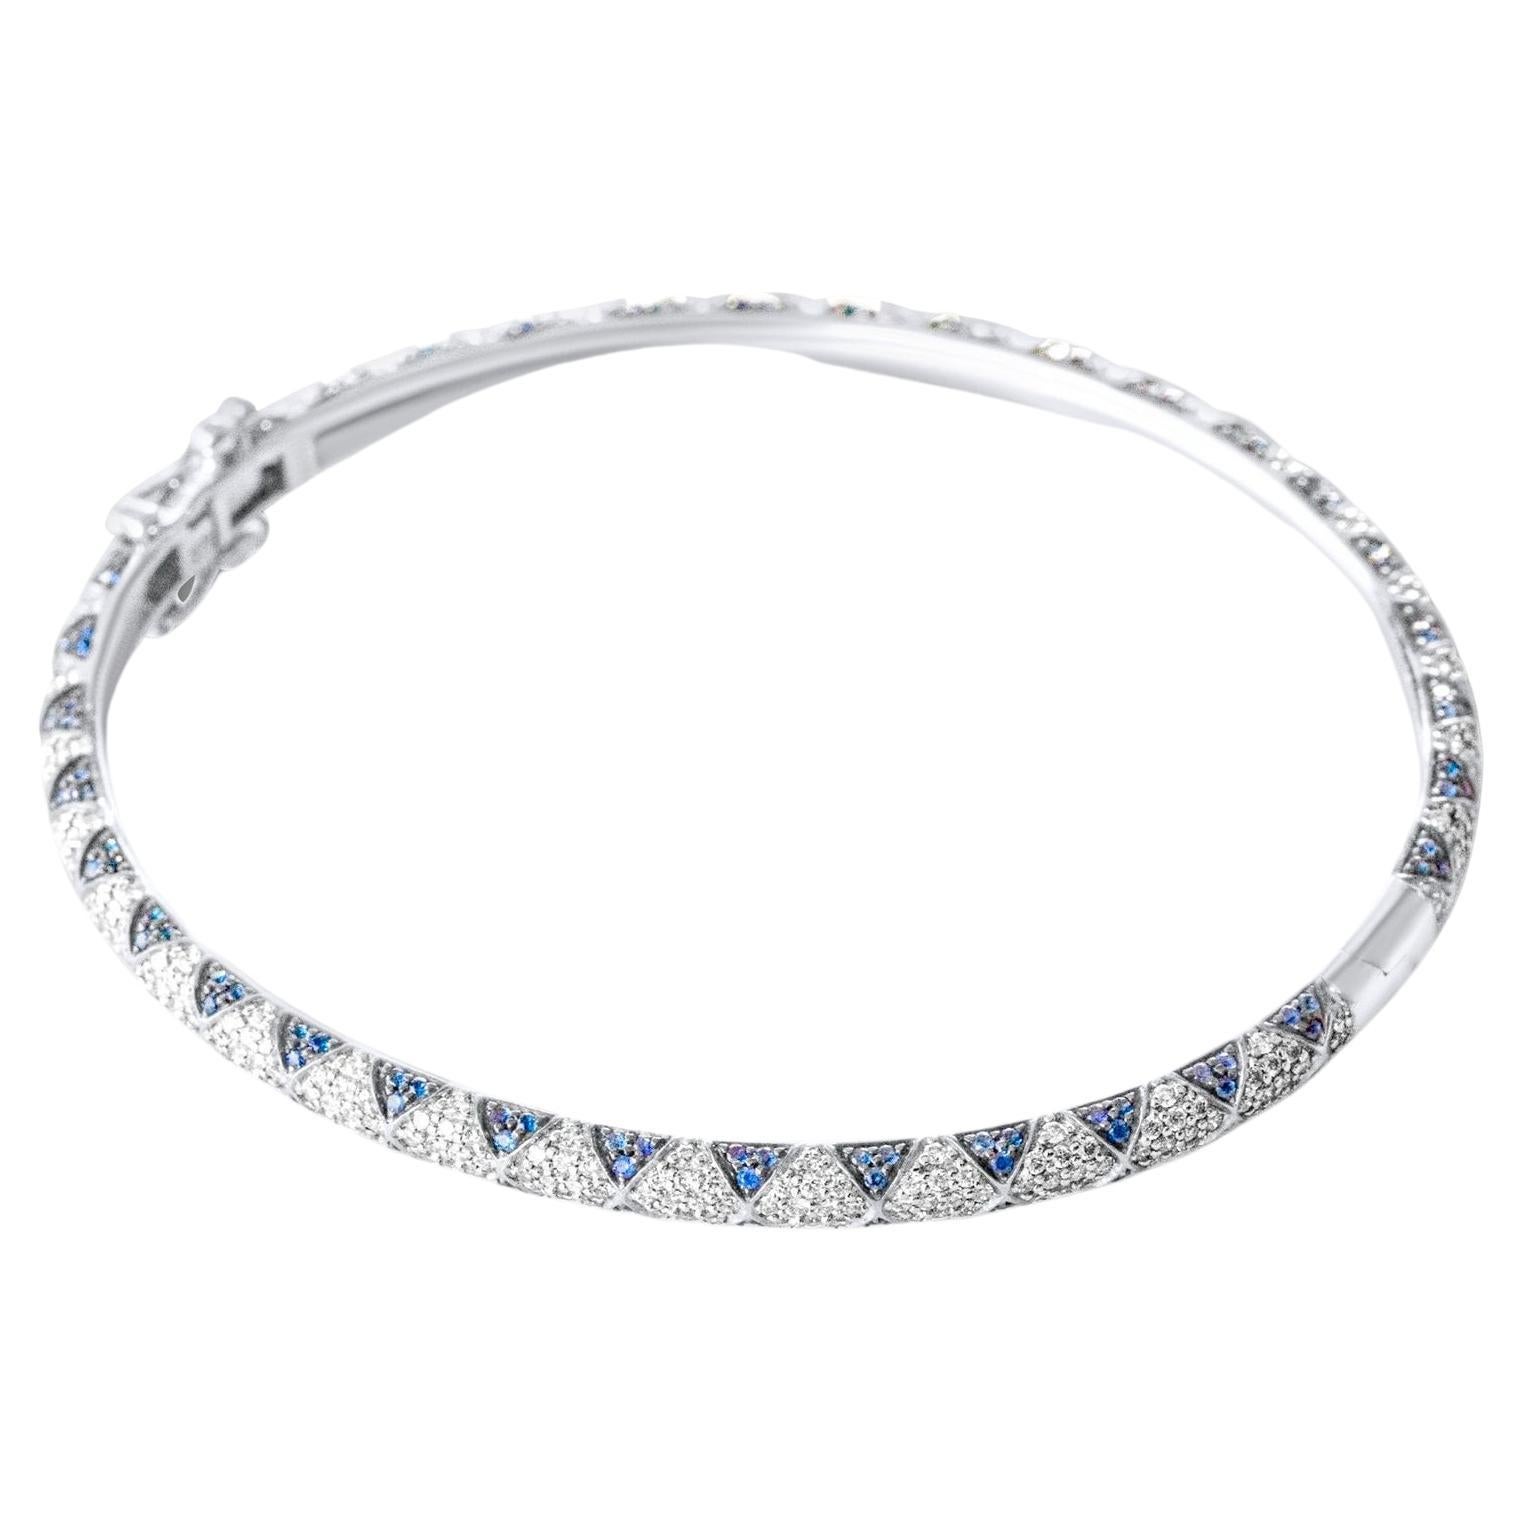 Lotus Bangle Bracelet with Sapphire Petals and Pave Diamonds, All Around For Sale